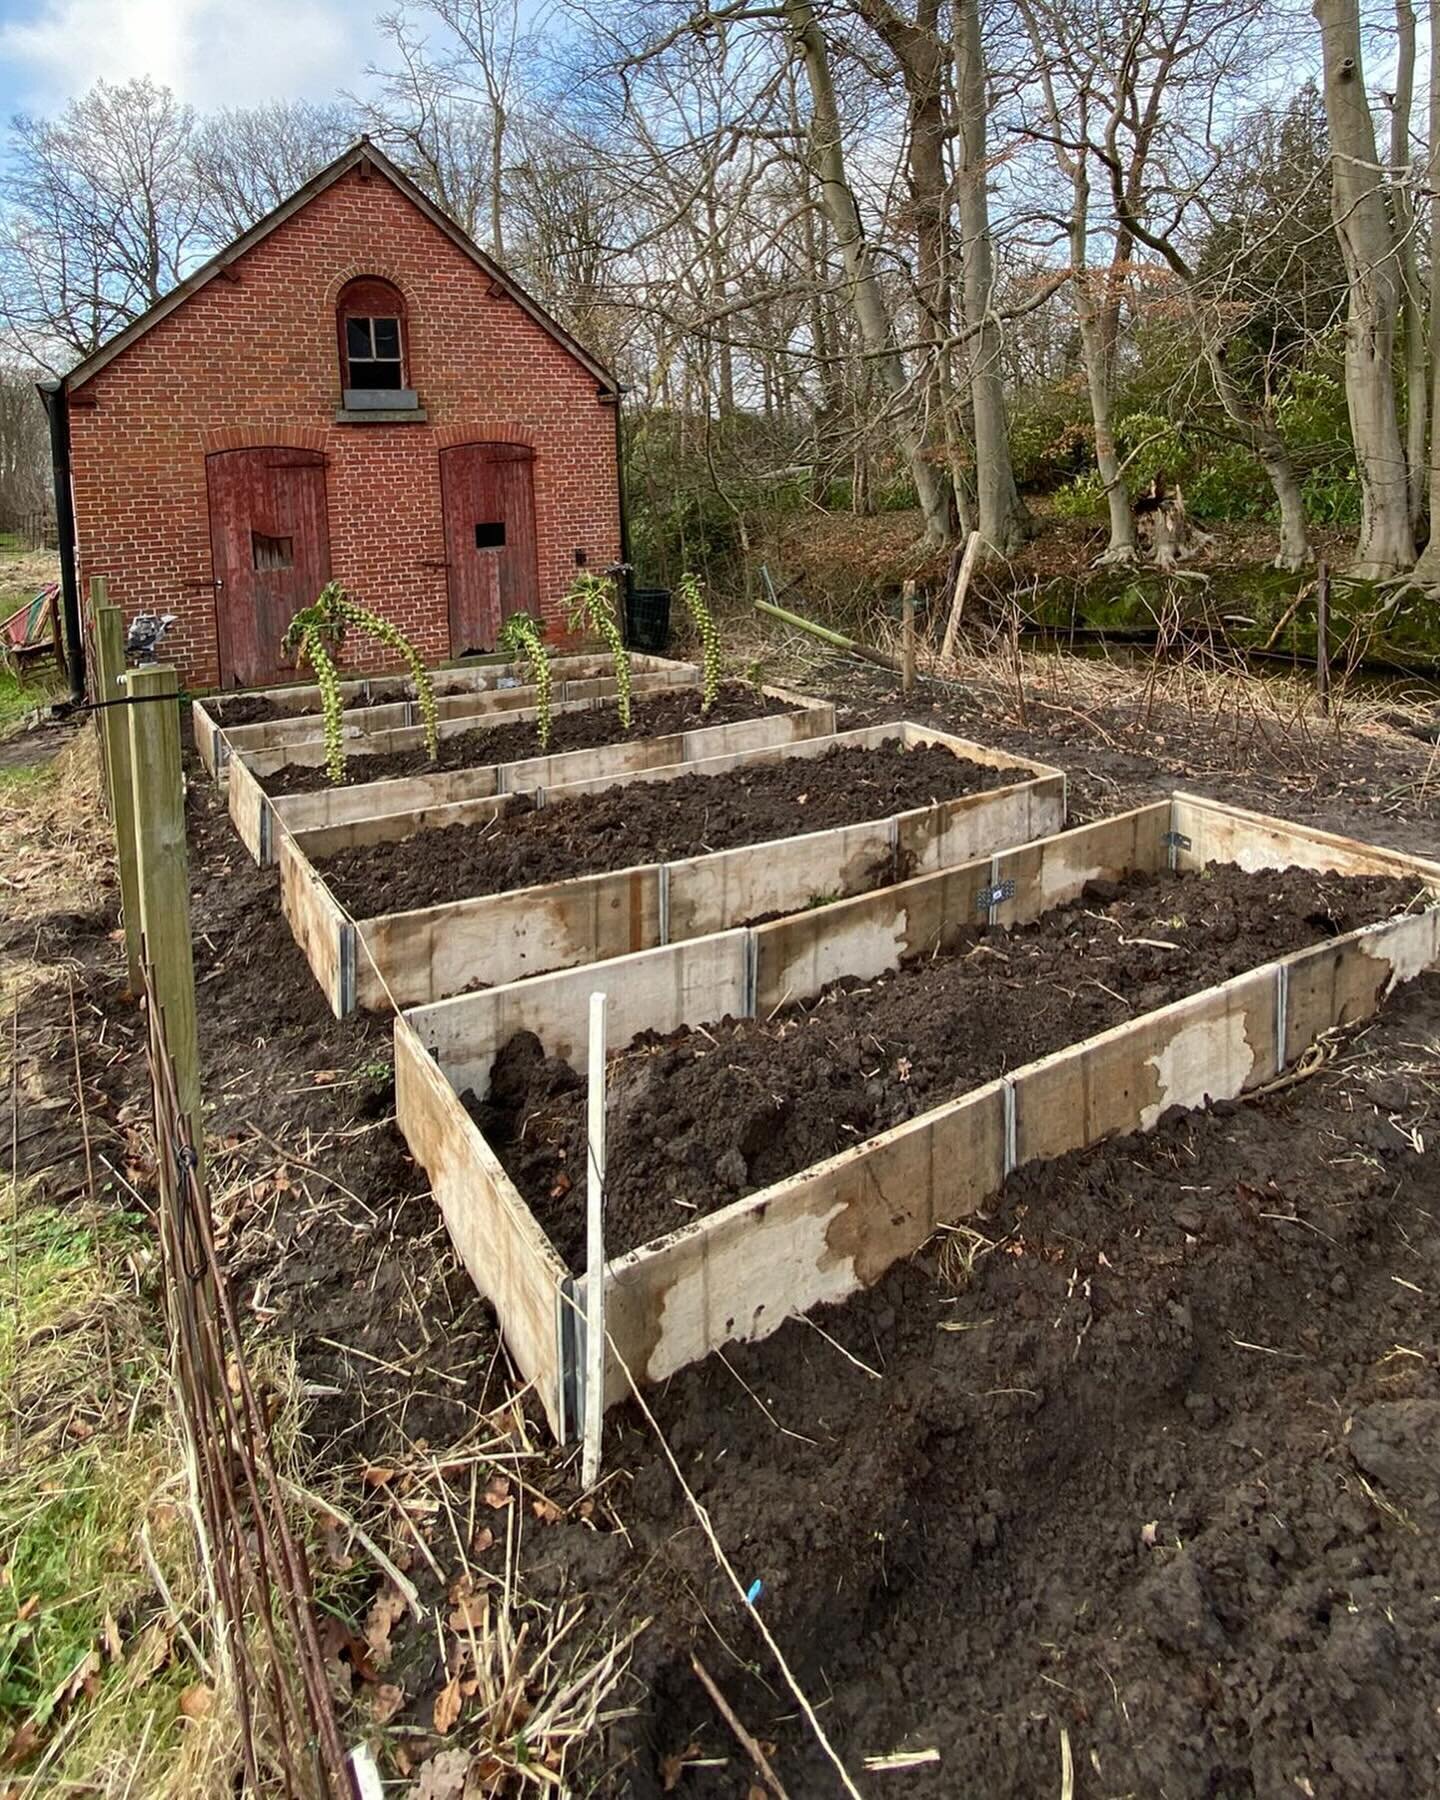 We&rsquo;ve started transforming our vegetable garden, which until now had been at ground level. We decided to change that by building raised beds.

The great advantage is that the location of the 6 vegetable garden beds is definitive. So it&rsquo;s 